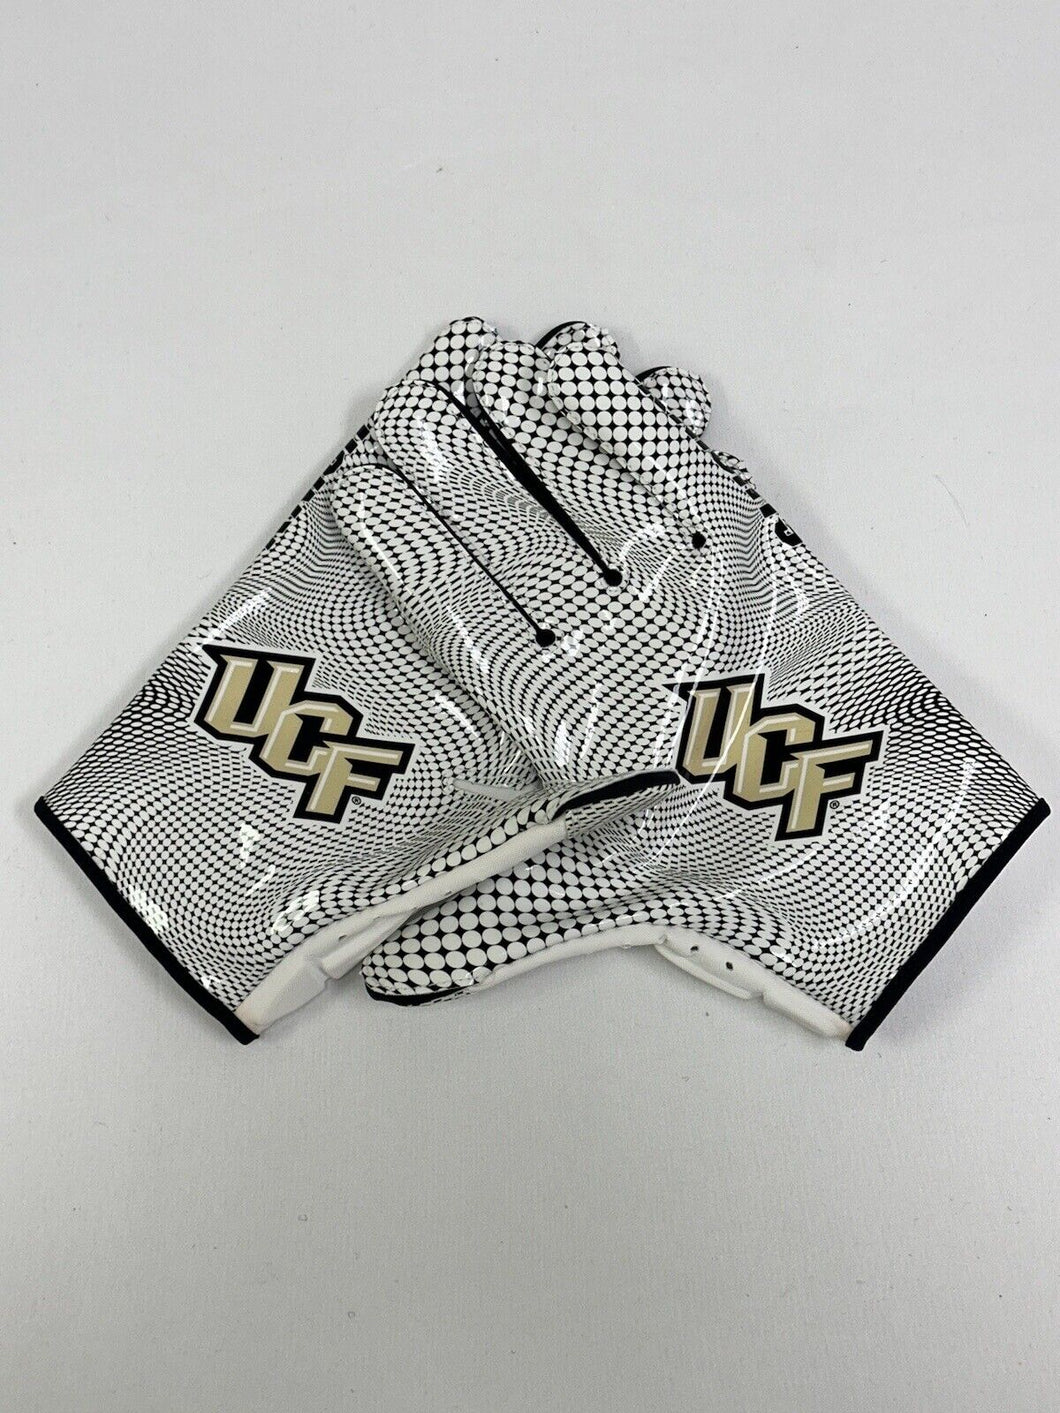 UCF Knights Game Issued / Worn Nike Vapor Jet Football Gloves - Size 4XL